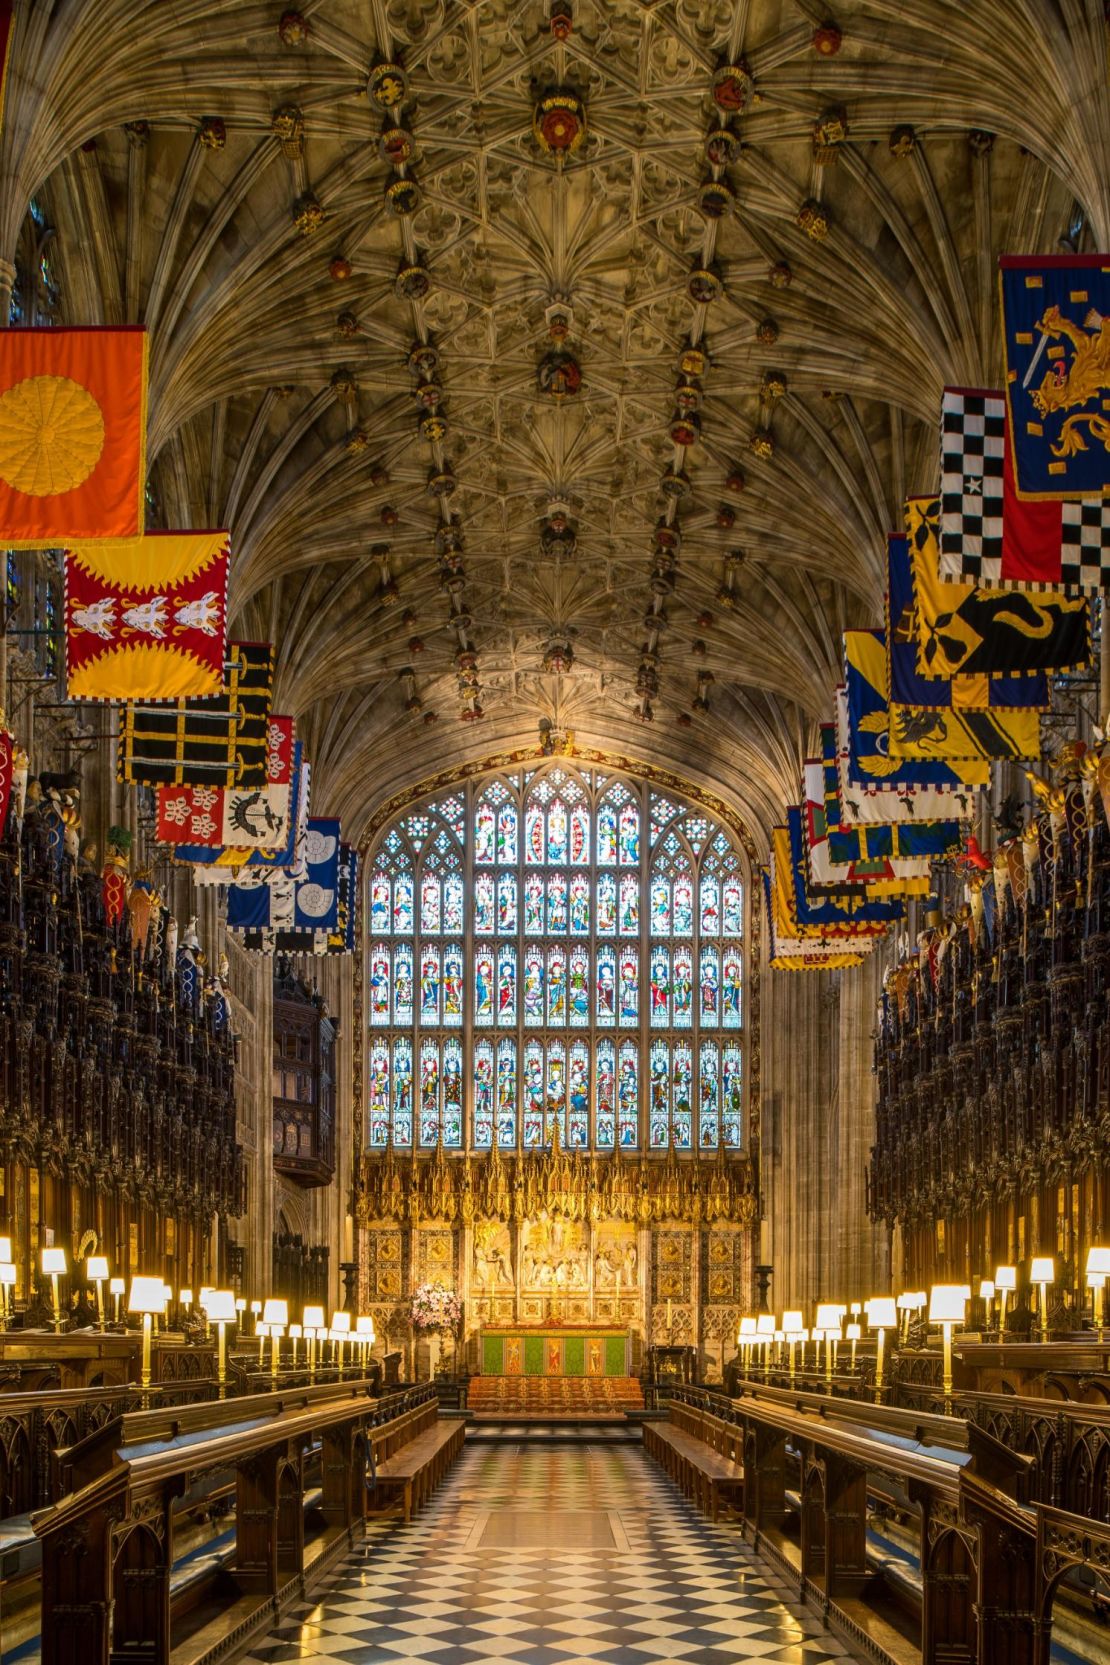 A view of the quire at St George's Chapel.